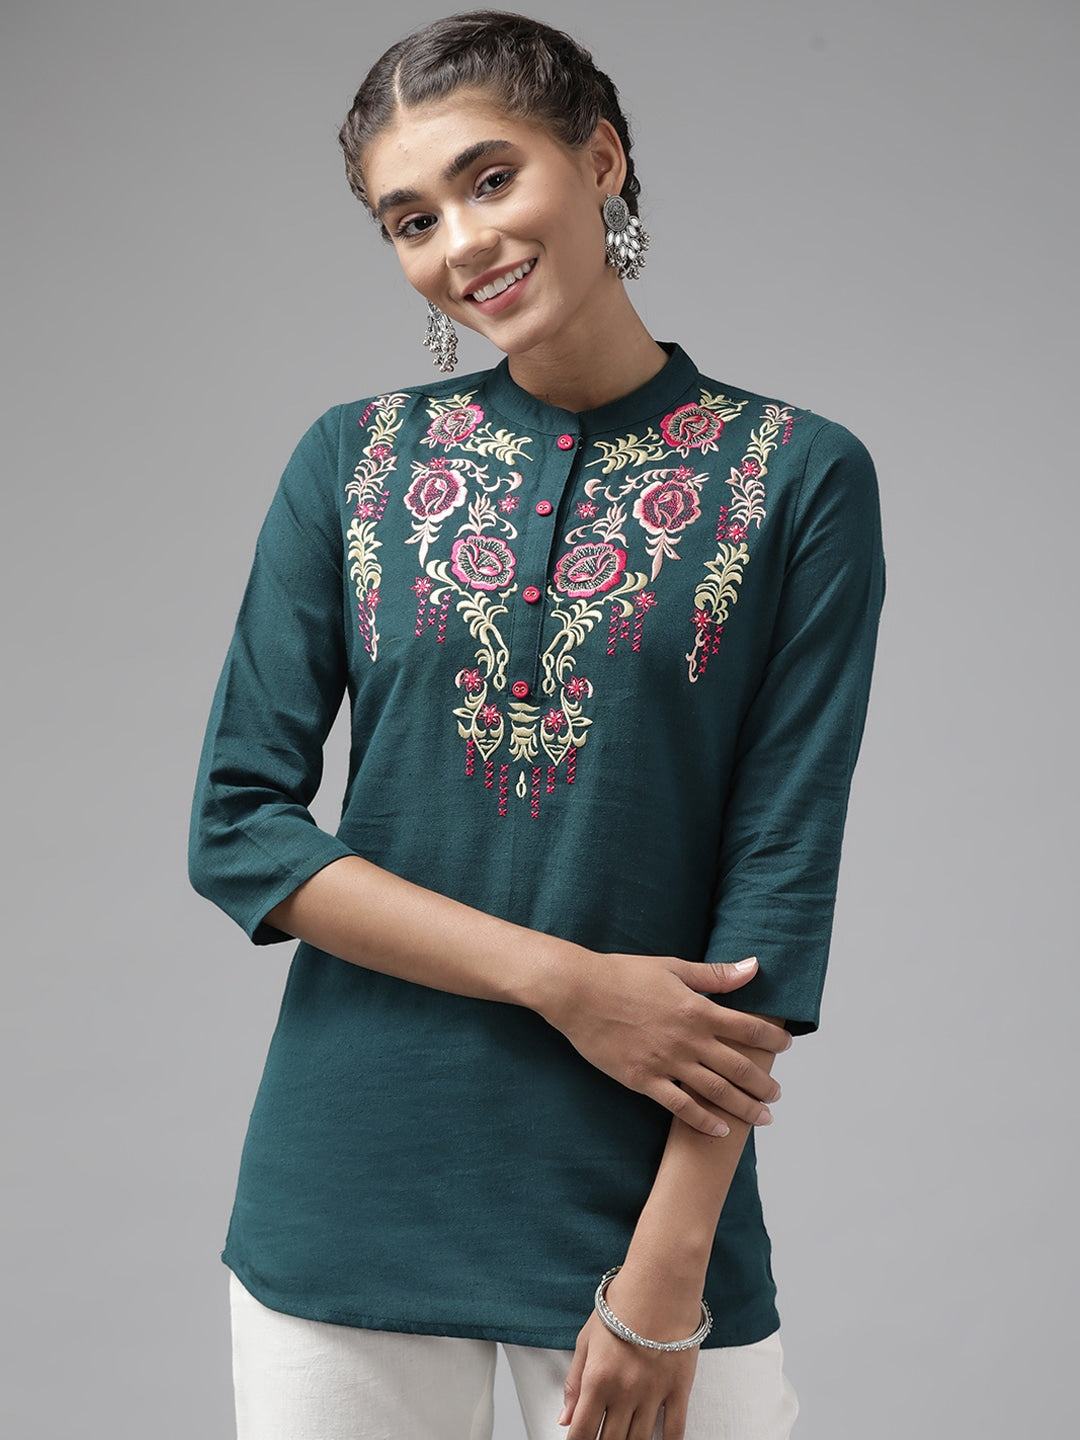 Teal Floral Embroidered  Top Yufta Store